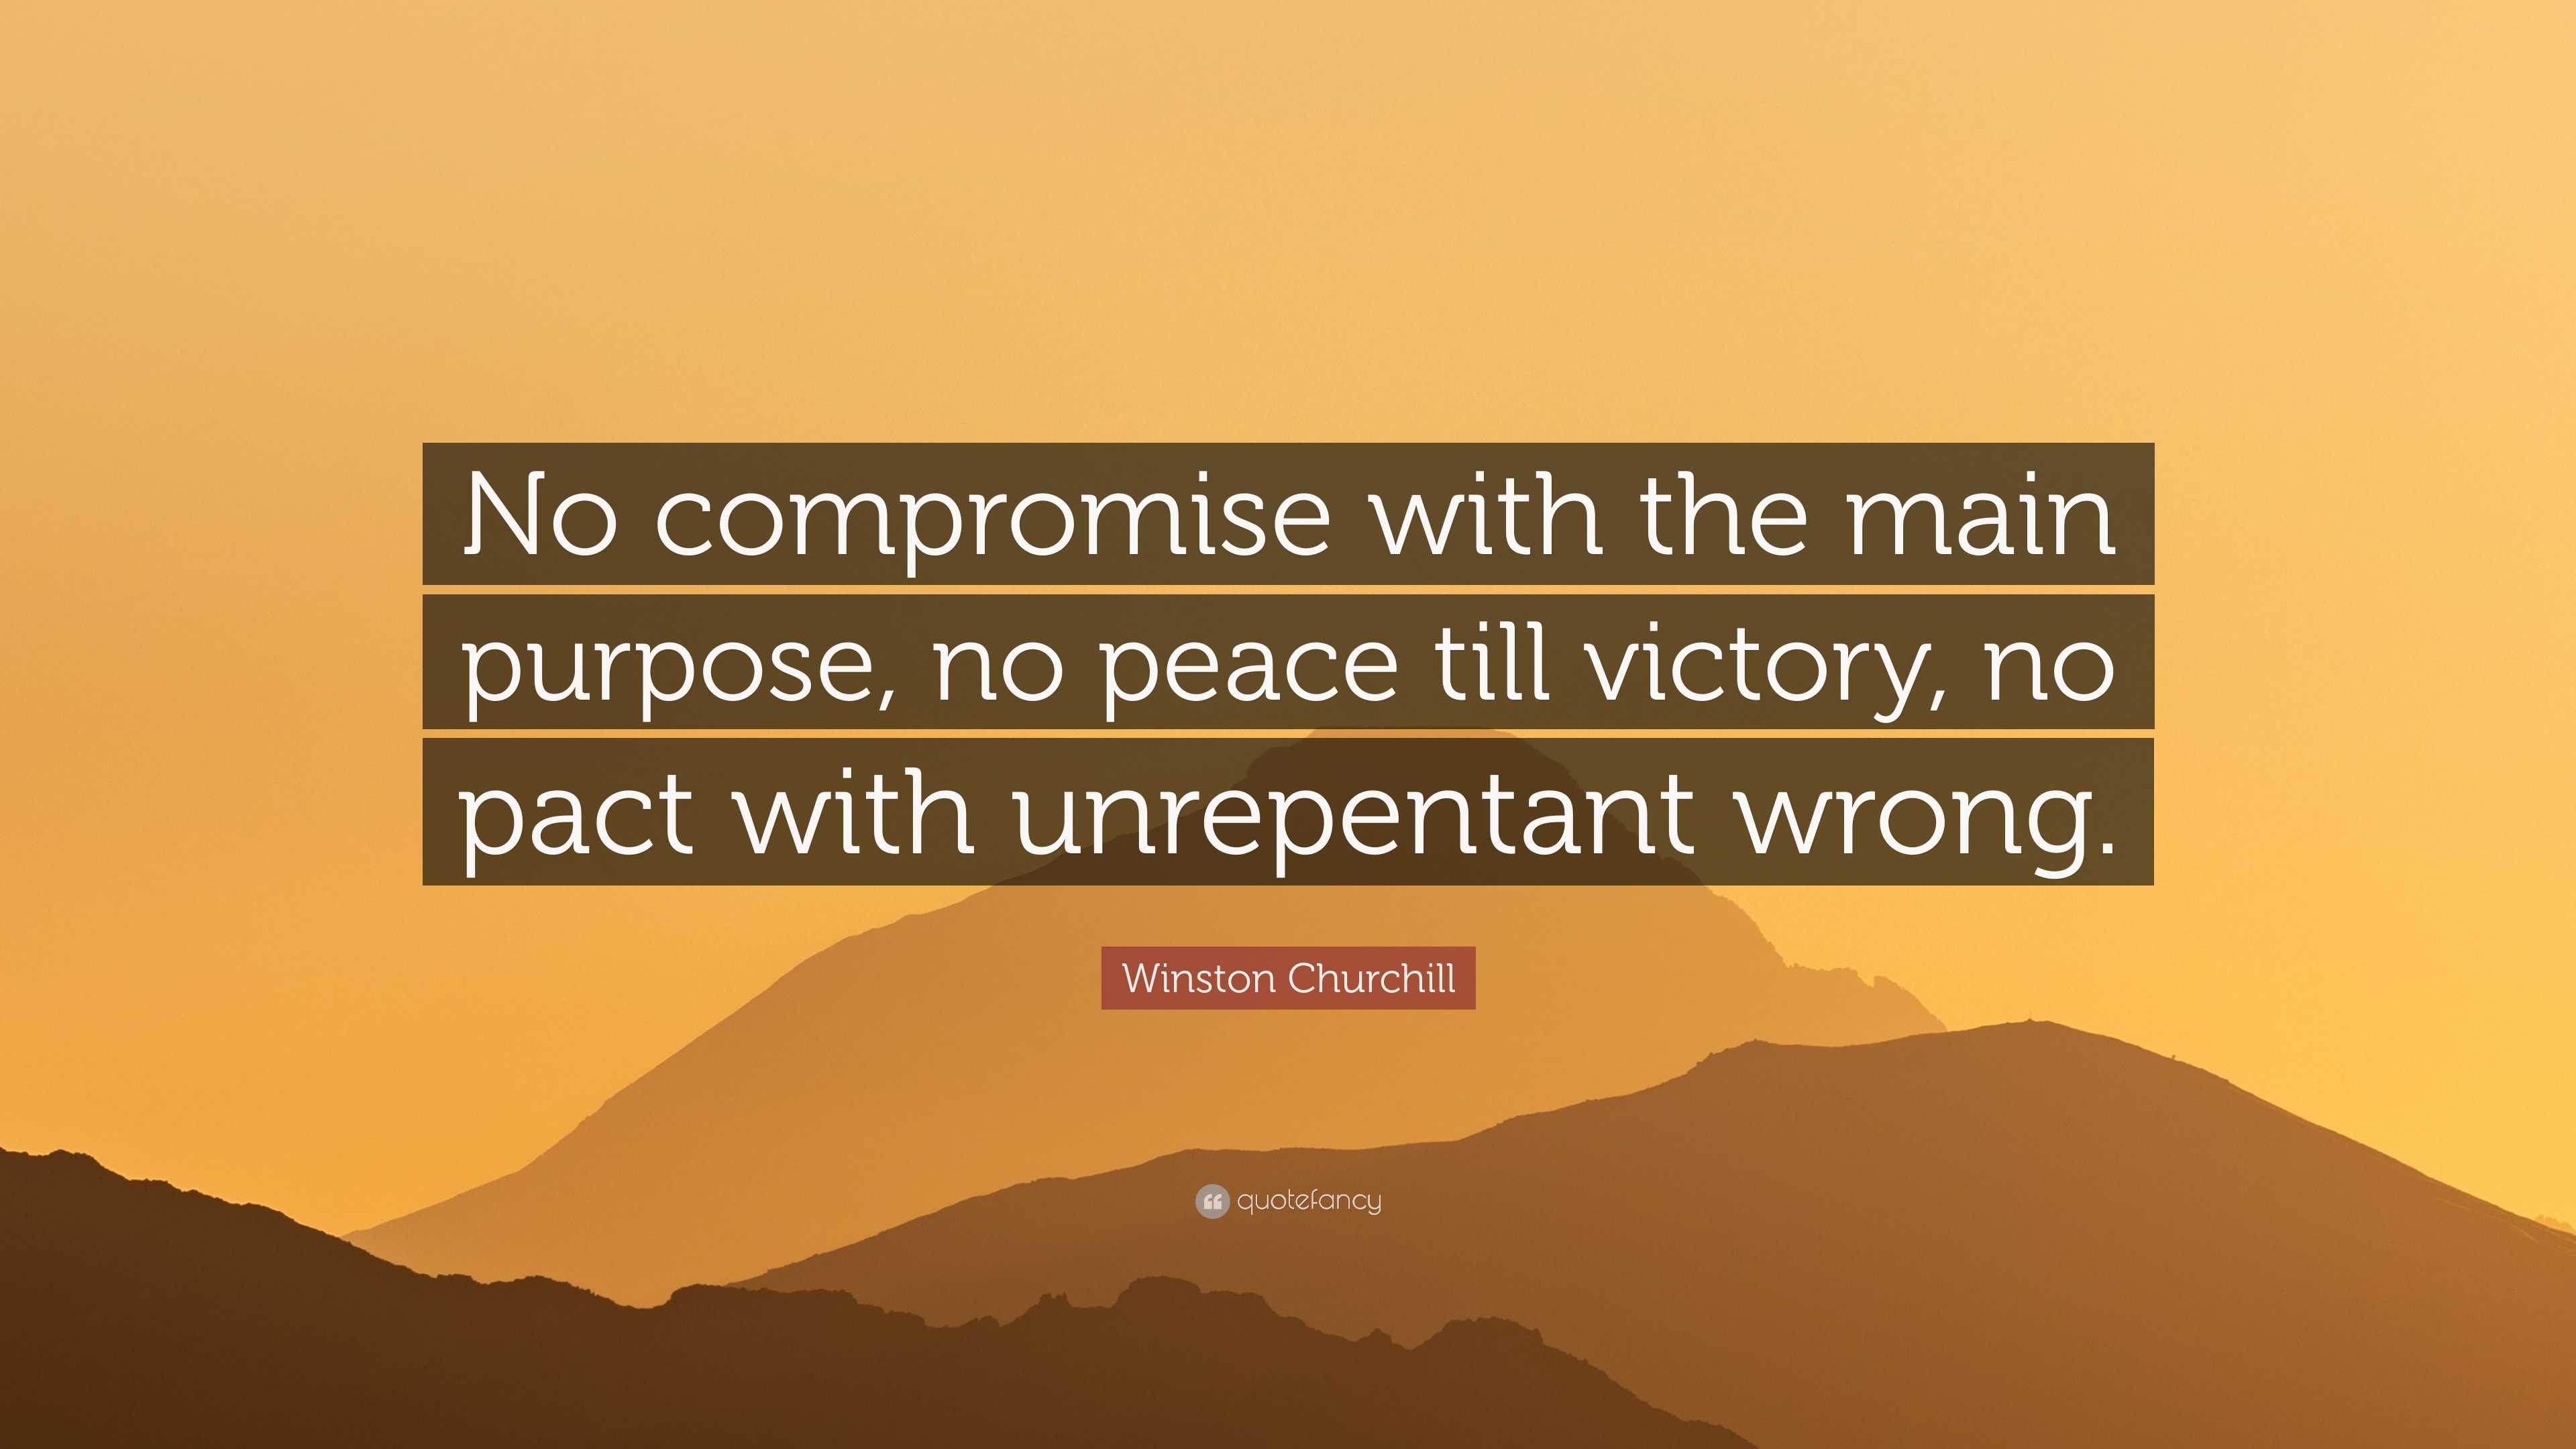 Winston Churchill Quote: “No compromise with the main purpose, no